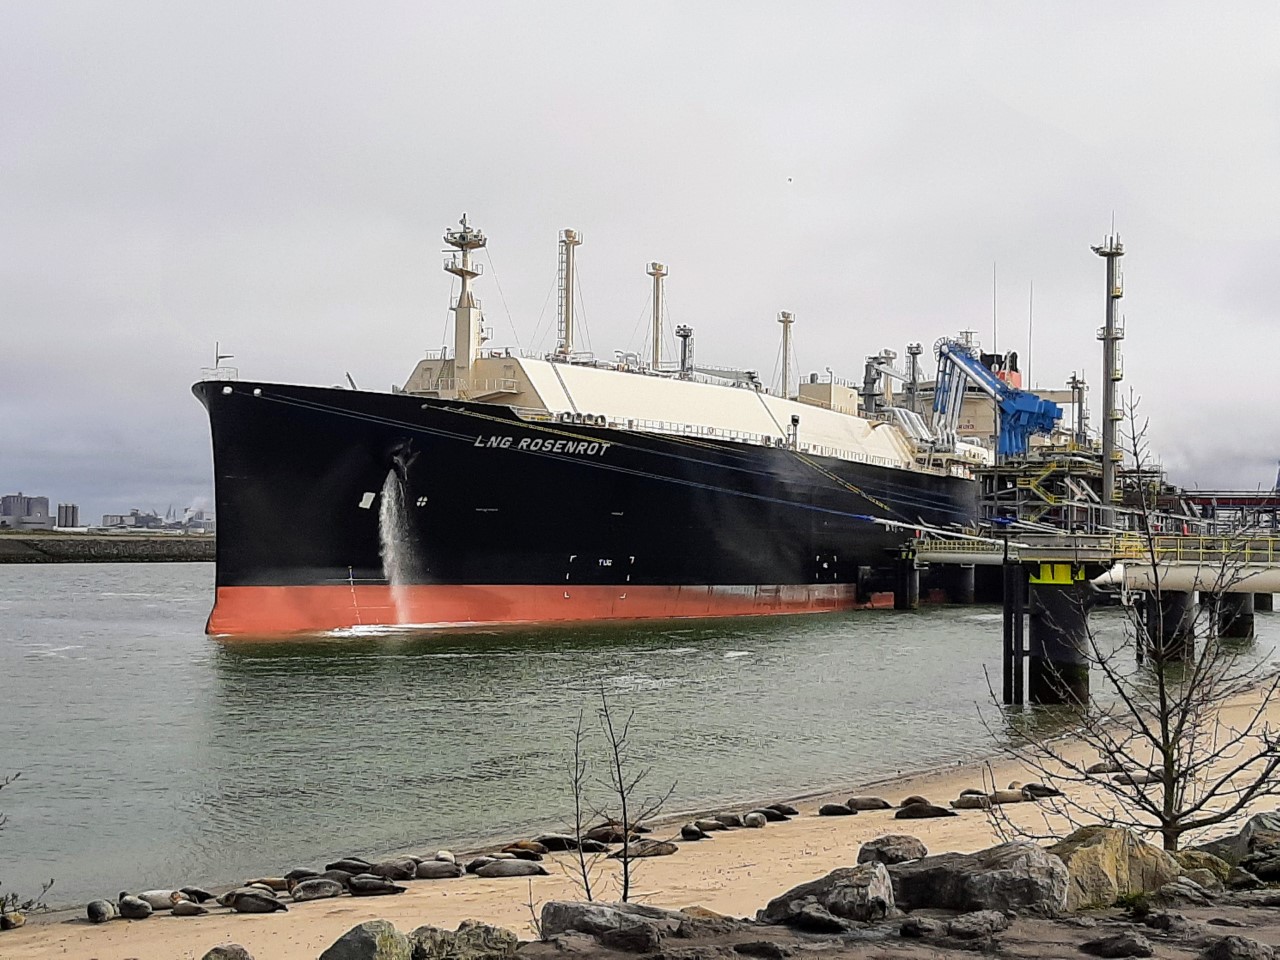 Uniper resumes Wilhelmshaven LNG plans as Germany looks to cut Russian gas reliance